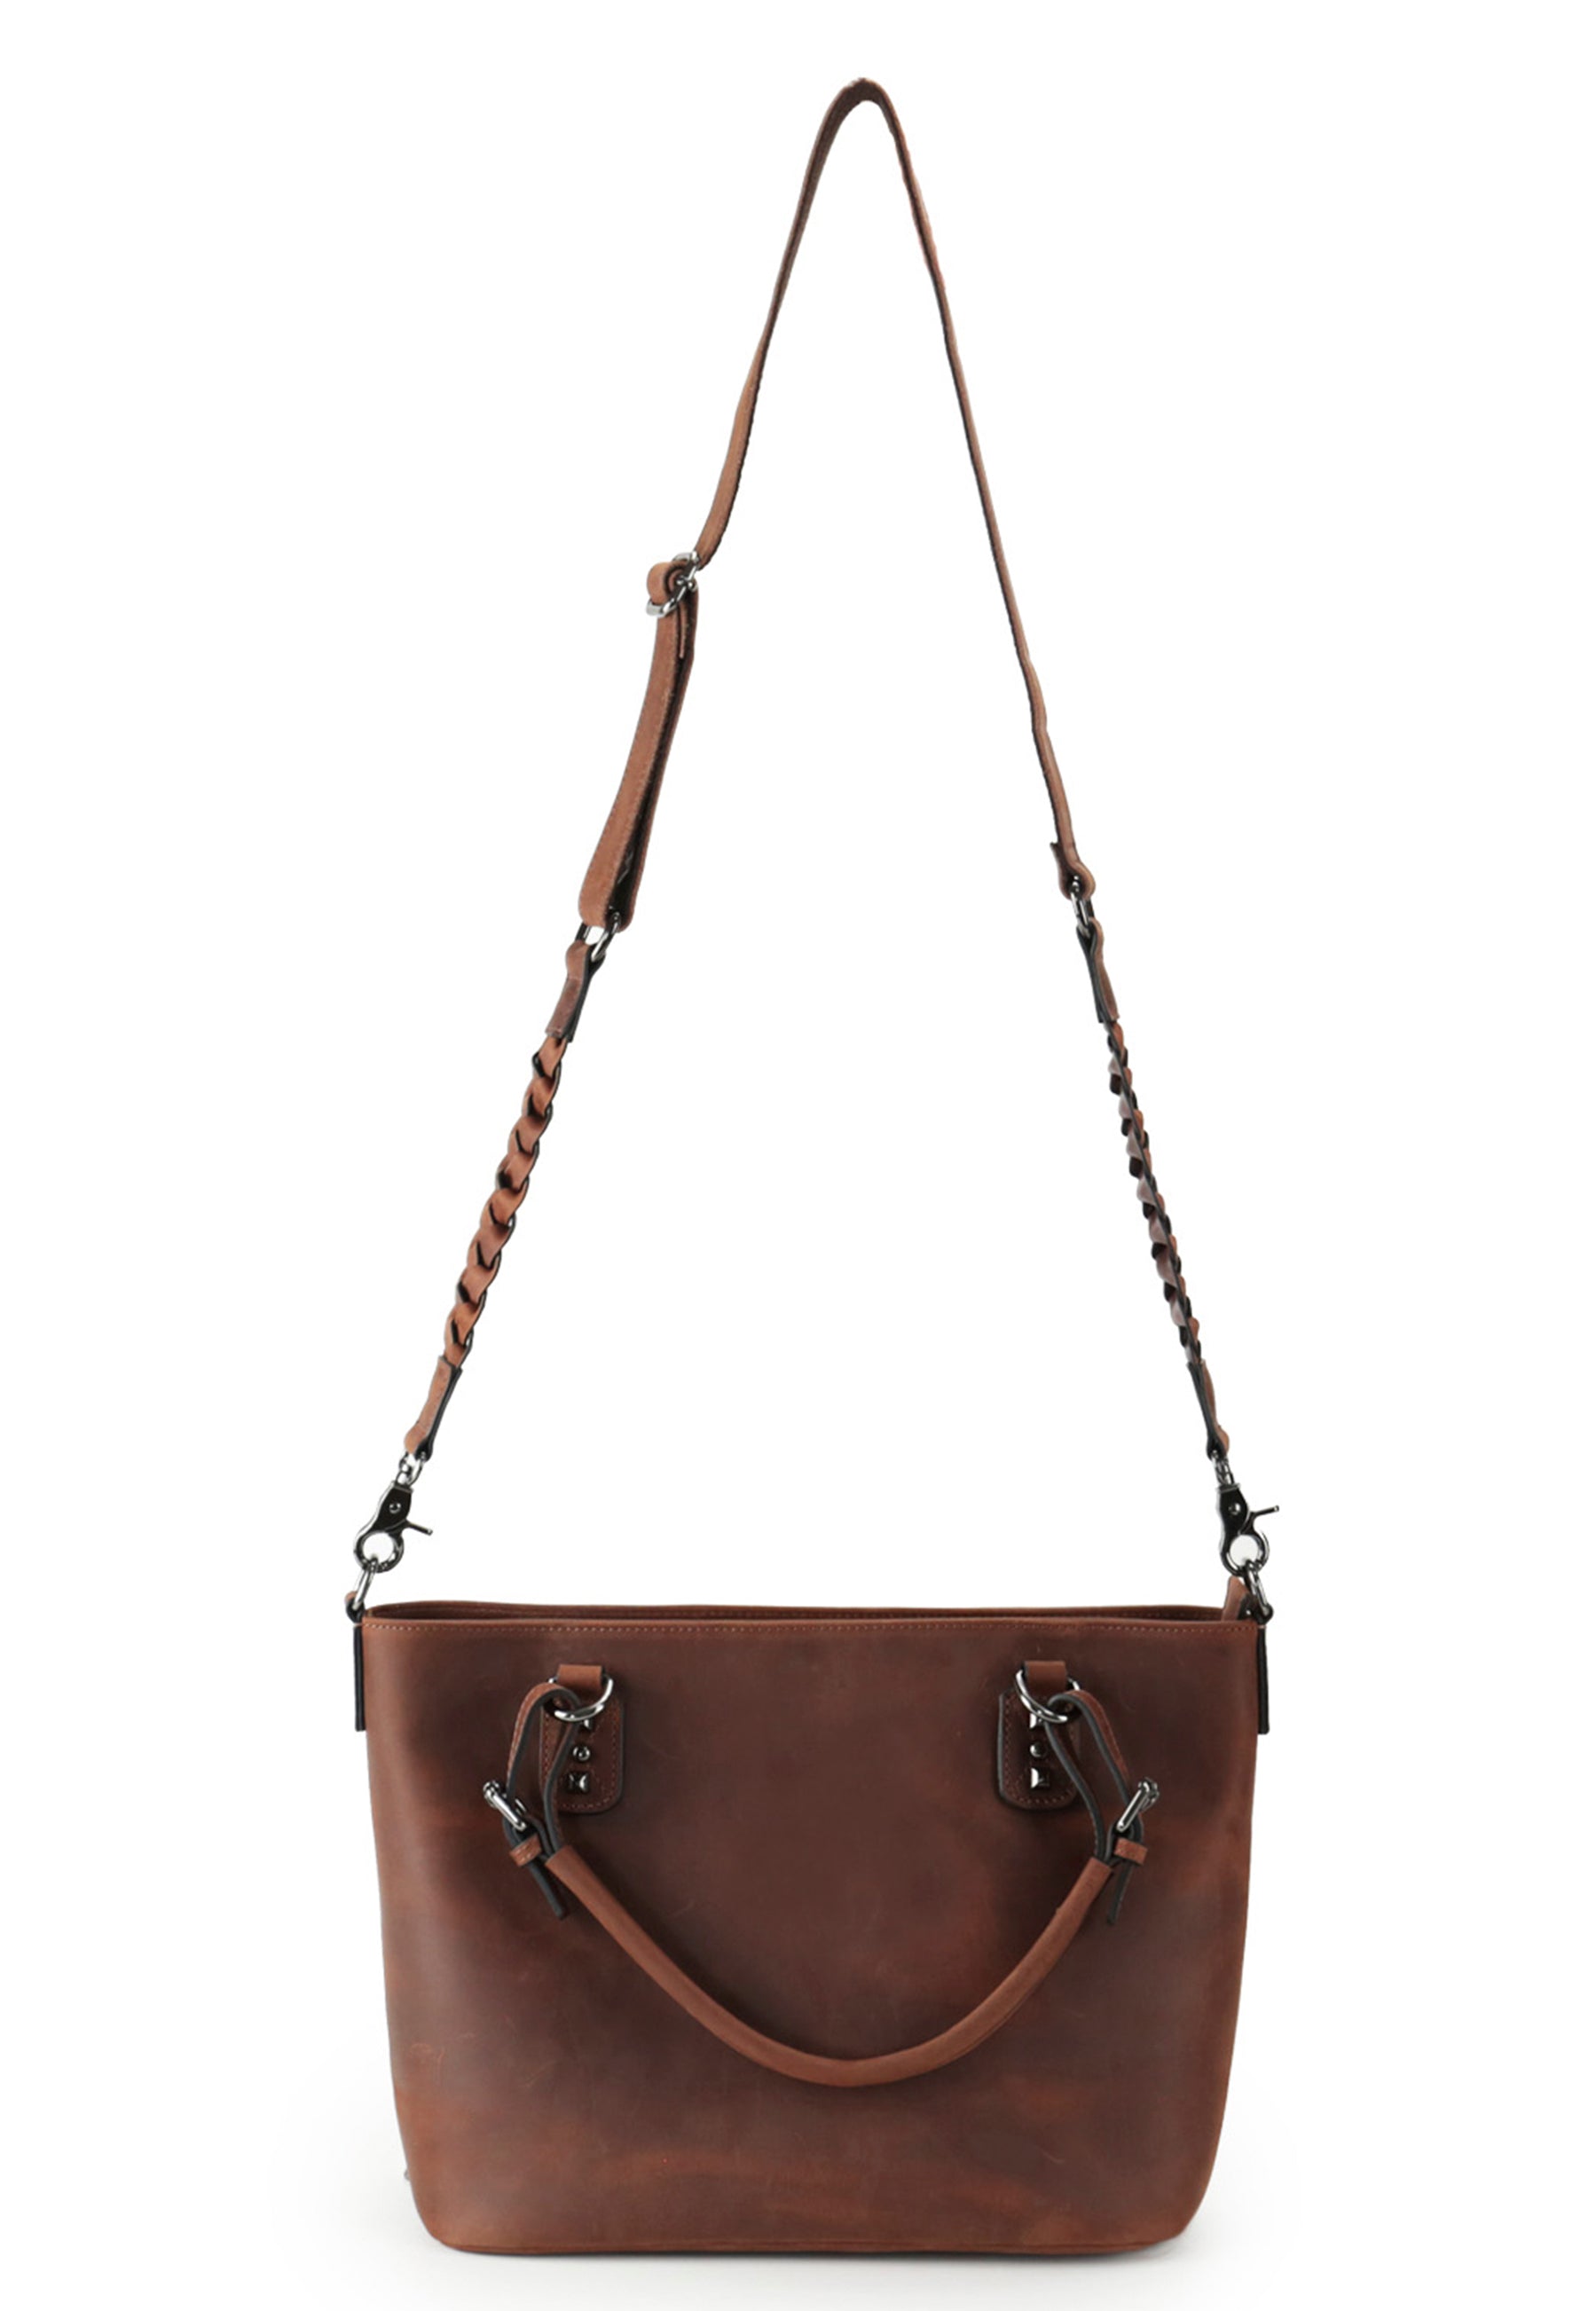 expanded view of crossbody concealed carry purse